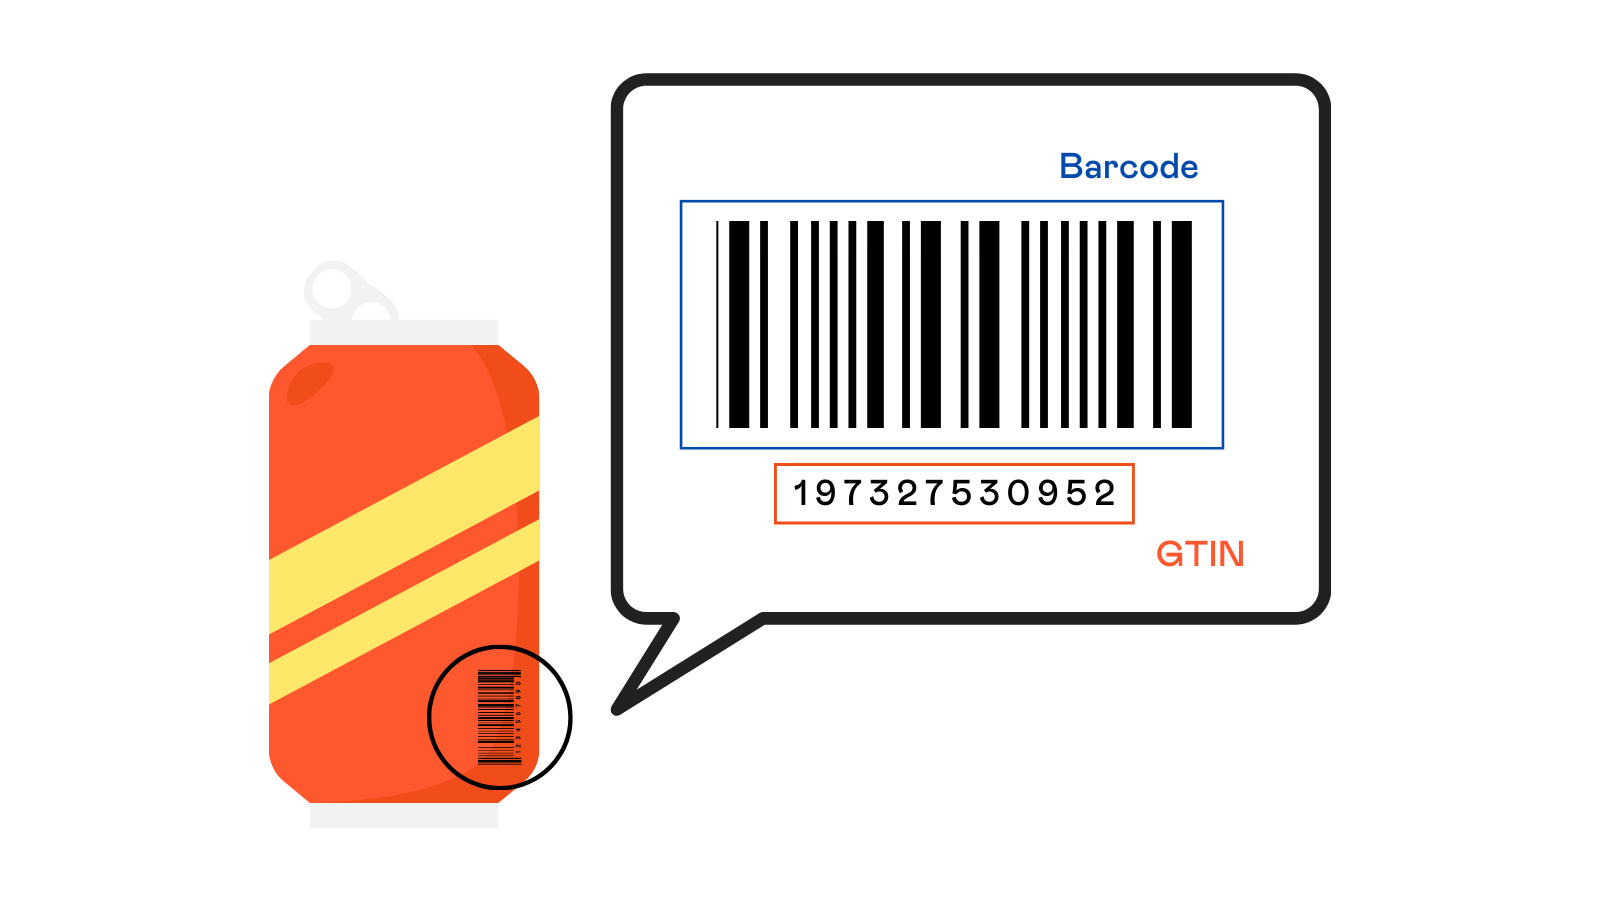 Difference between GTIN and barcode